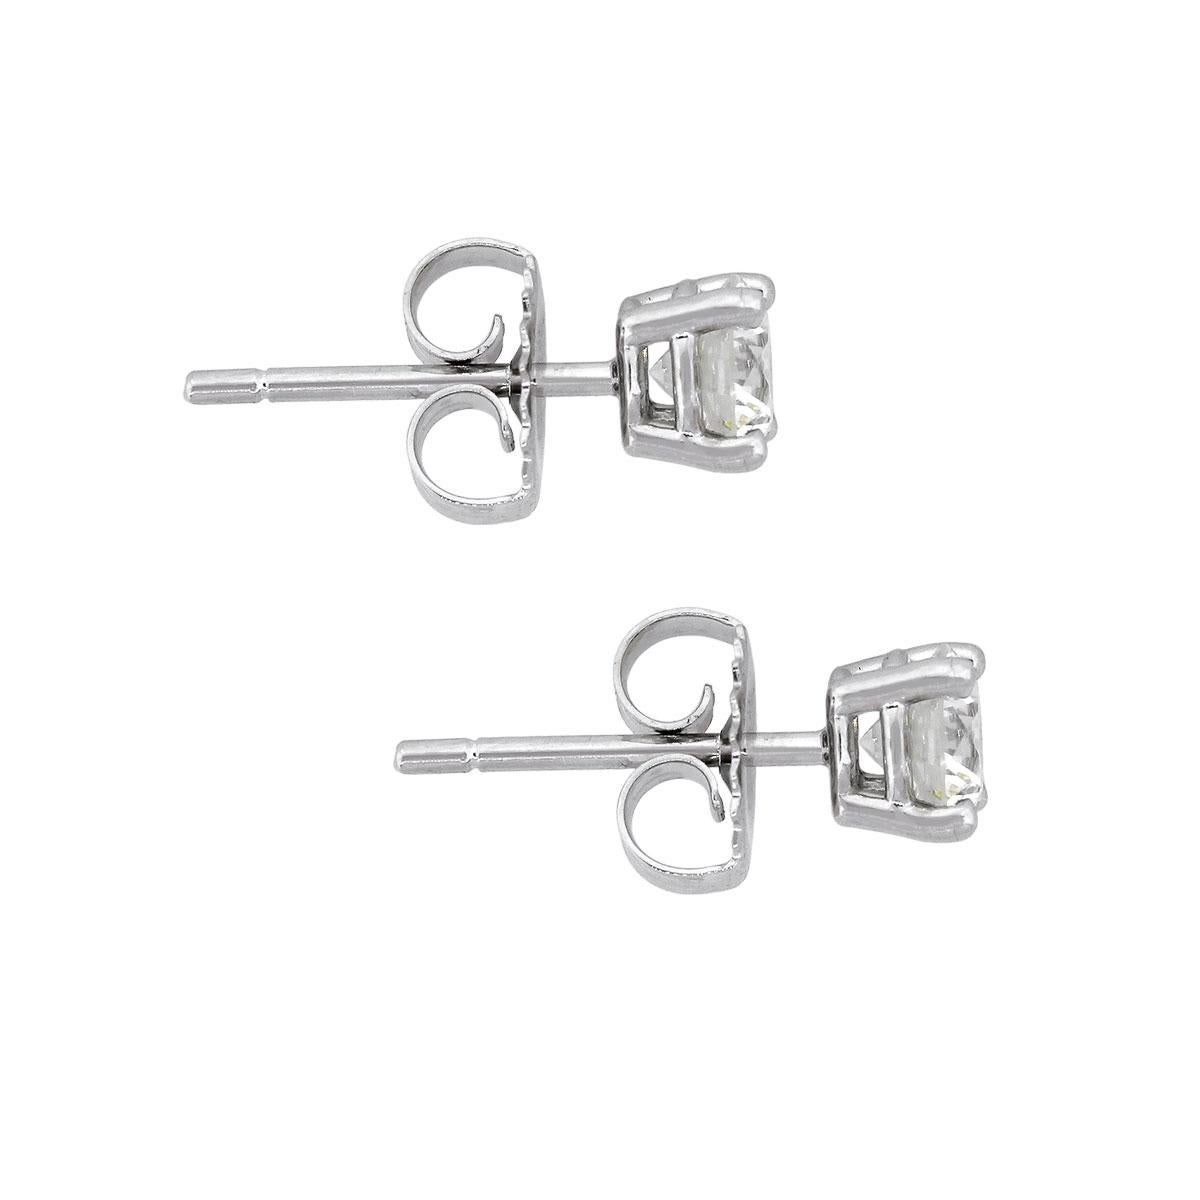 Material: 14k white gold
Diamond Details: Approximately 1.01ctw of round brilliant diamonds. Diamonds are I/J in color and SI in clarity.
Measurements: 0.61″ x 0.26″ x 0.26″
Earring Backs: Tension post
Total Weight: 1.3g (0.8dwt)
SKU: A30312436